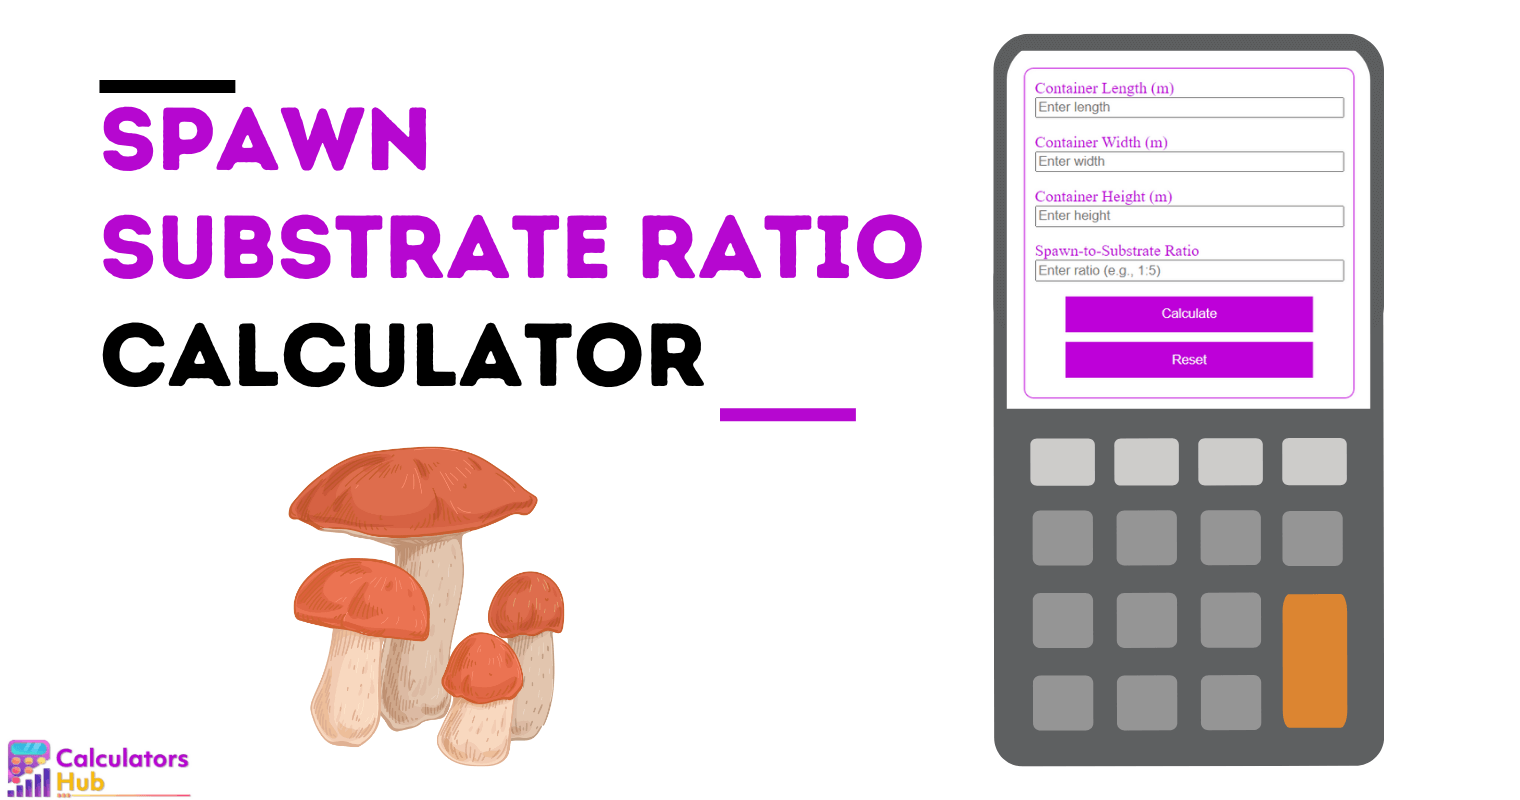 Spawn Substrate Ratio Calculator